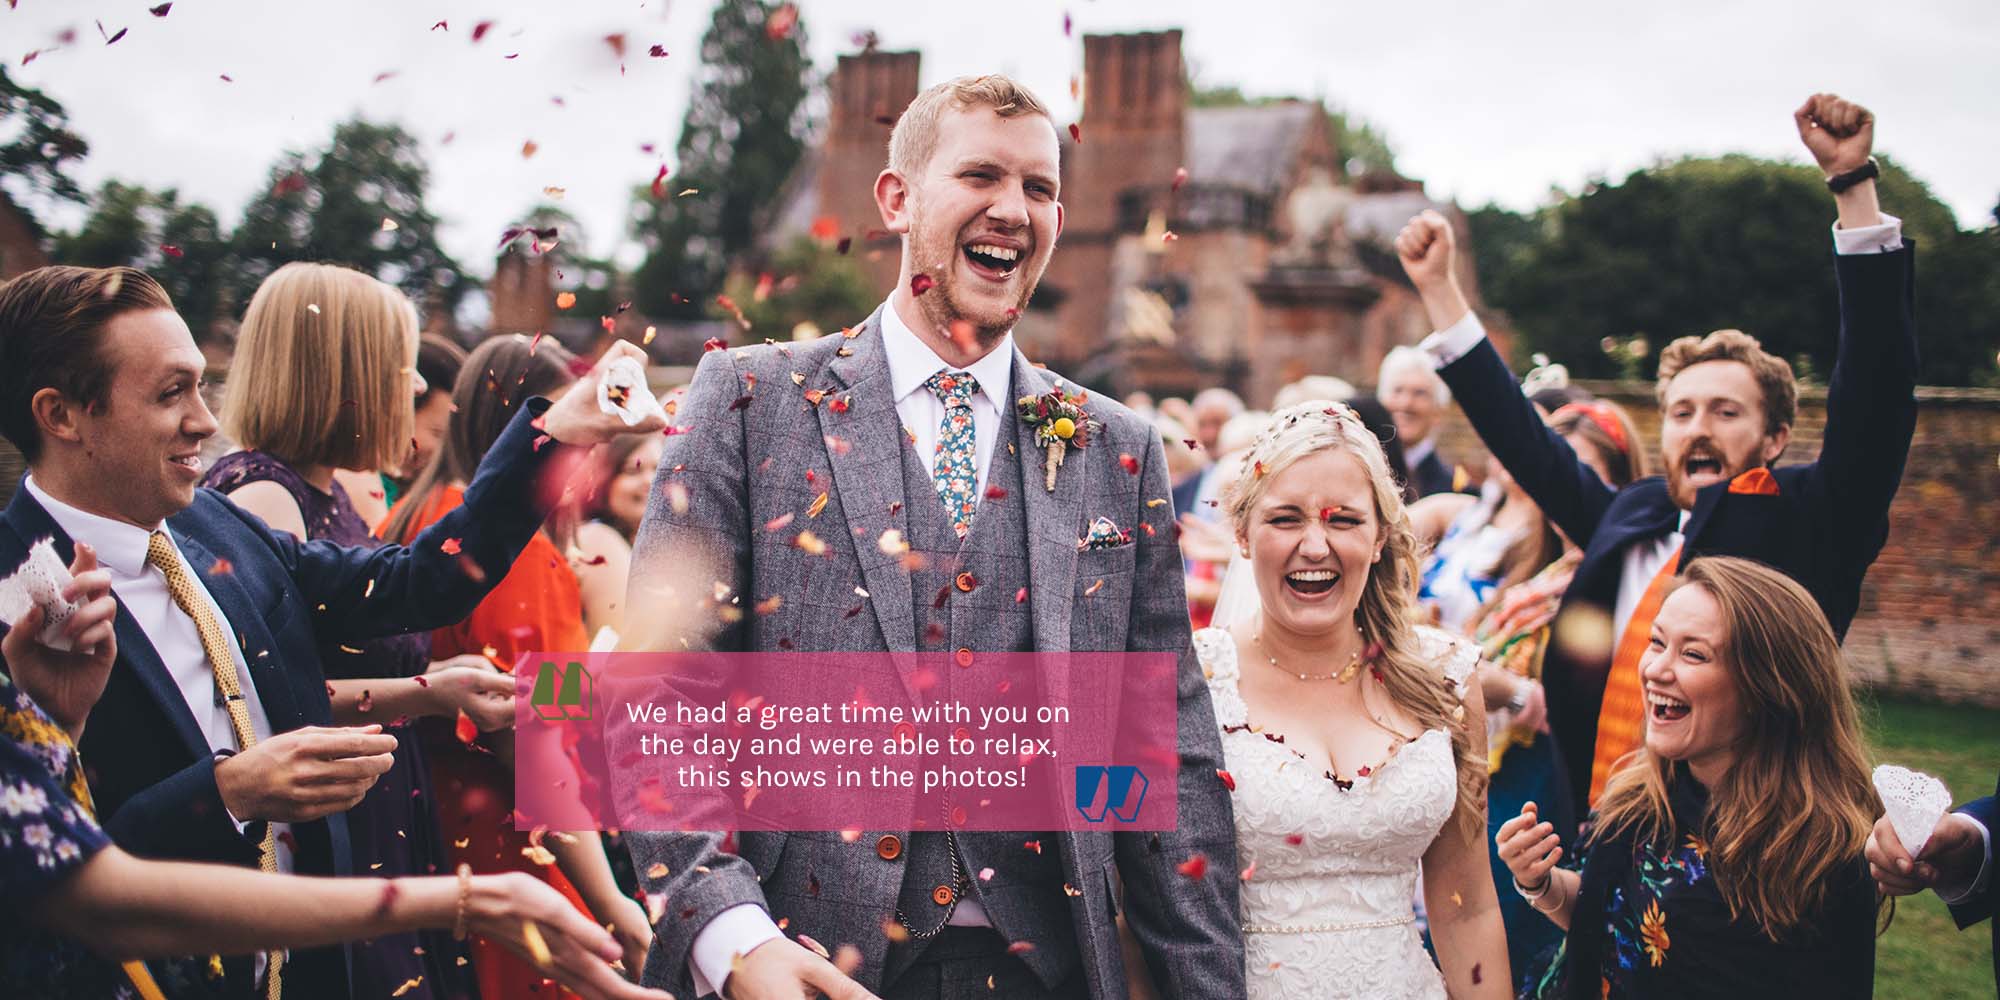 confetti photos containing quote testimonial about mike plunkett